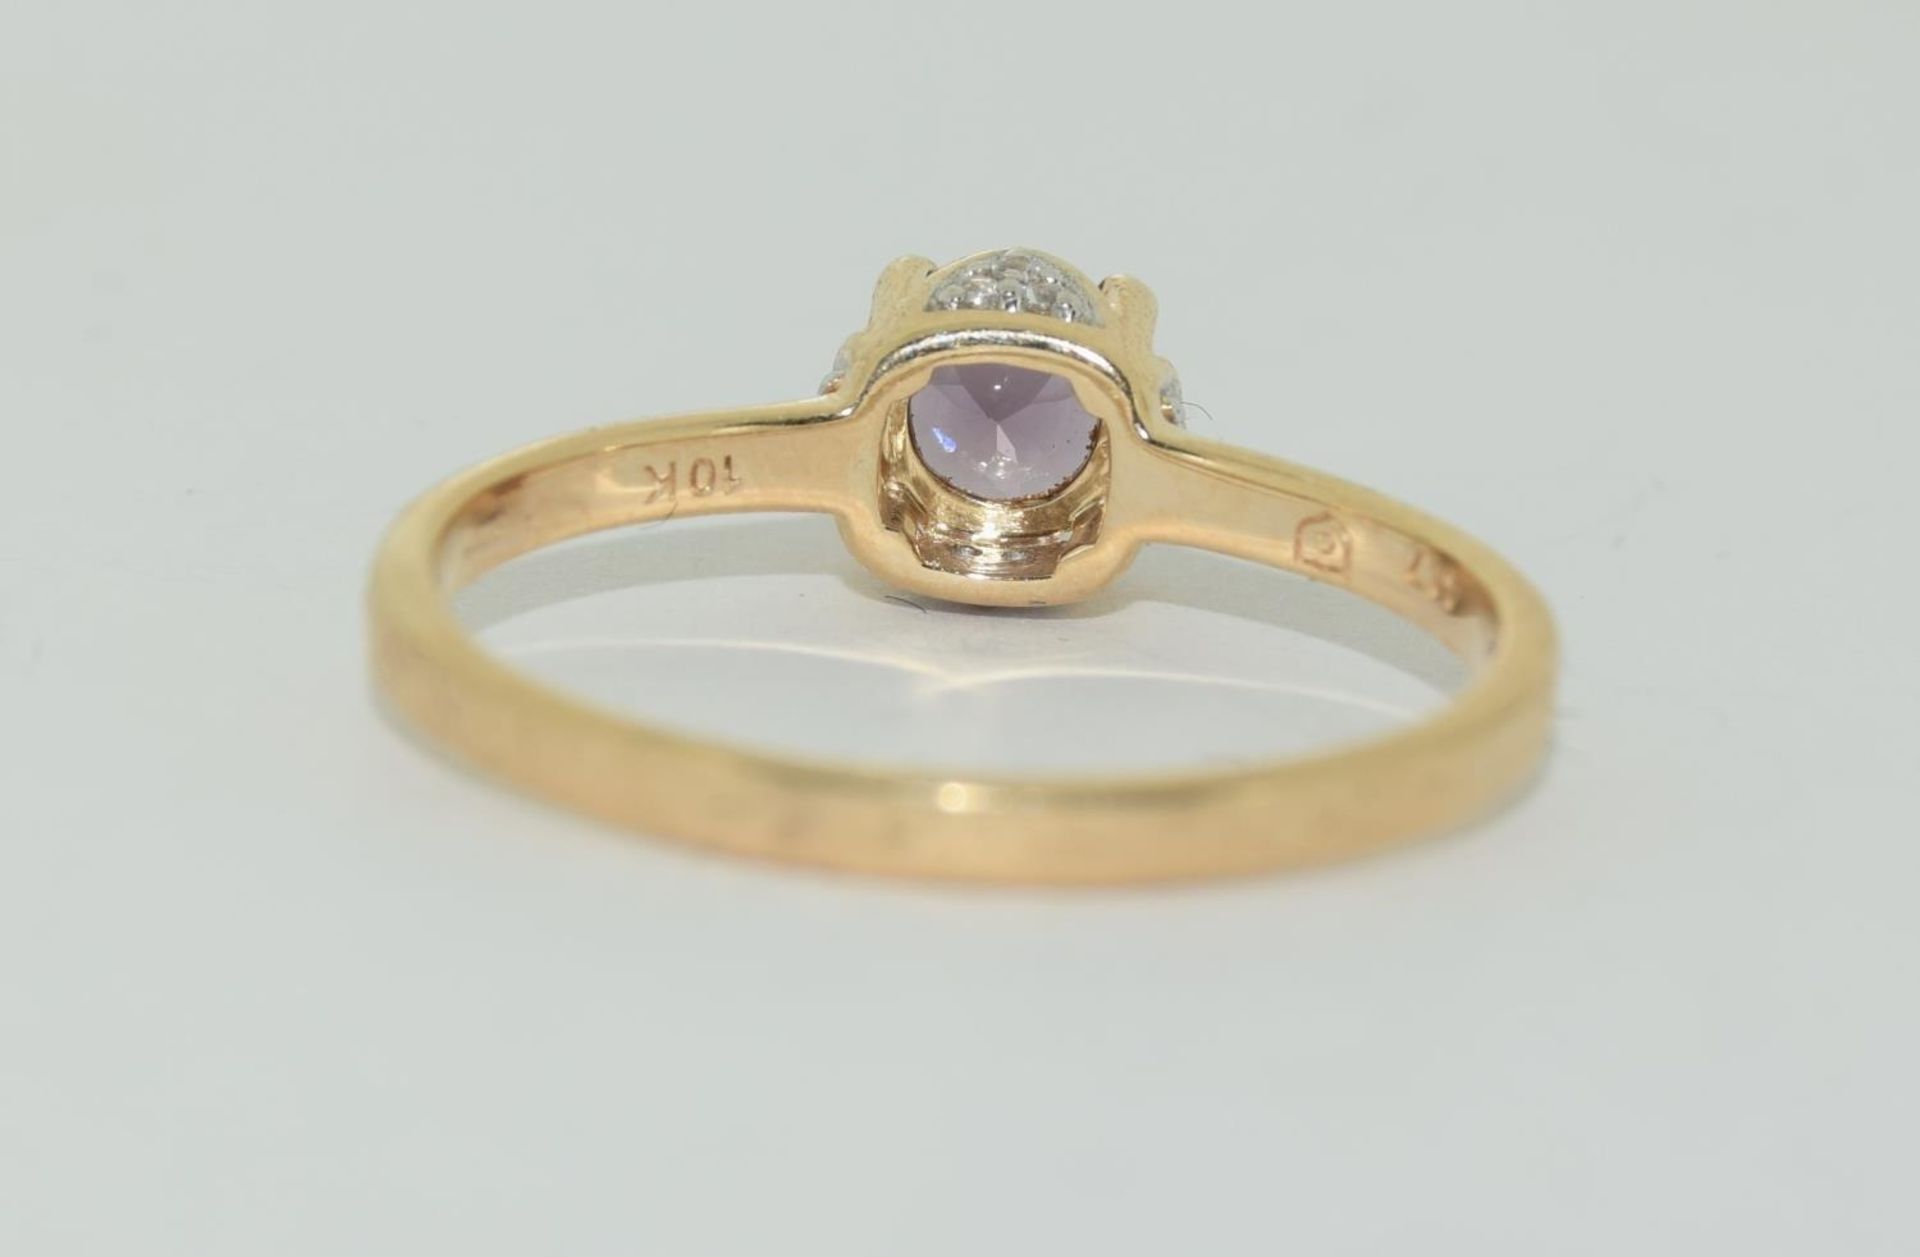 9ct gold ladies Amethyst and diamond crown ring size R - Image 3 of 5